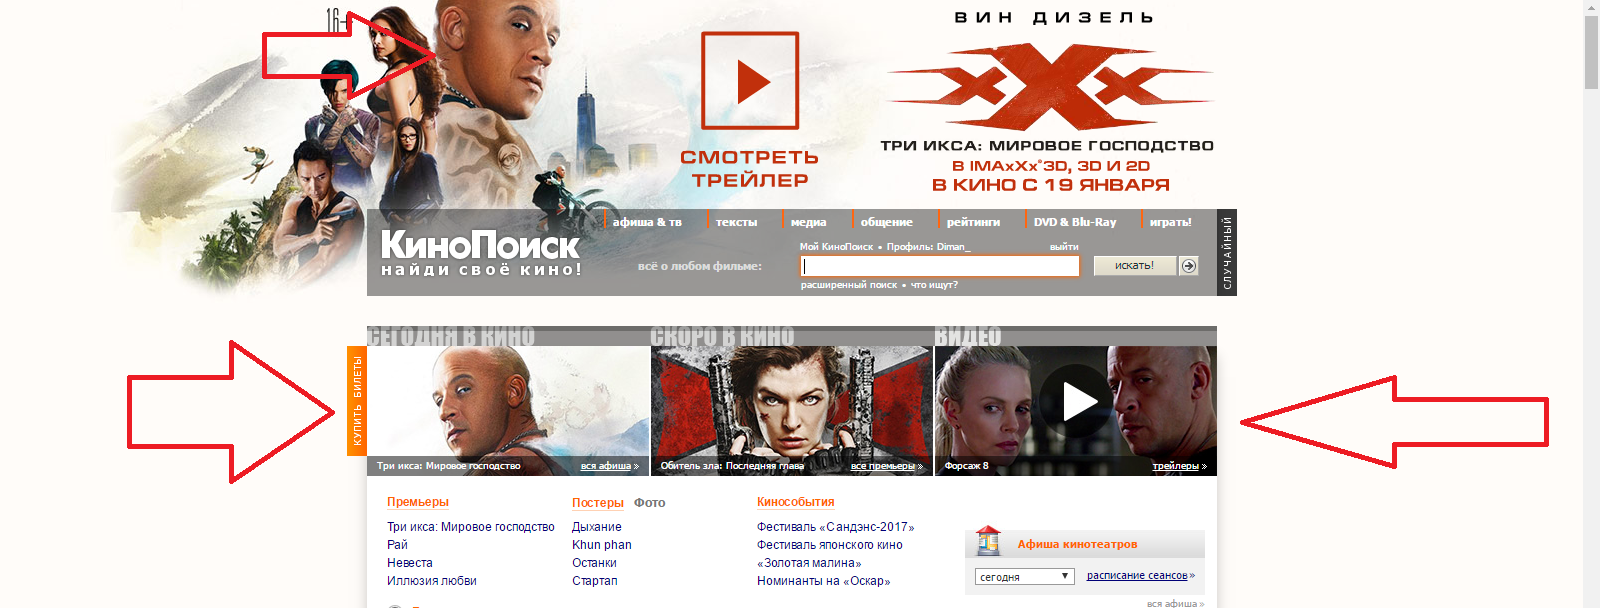 This look - Vin Diesel, The fast and the furious, KinoPoisk website, Three X's